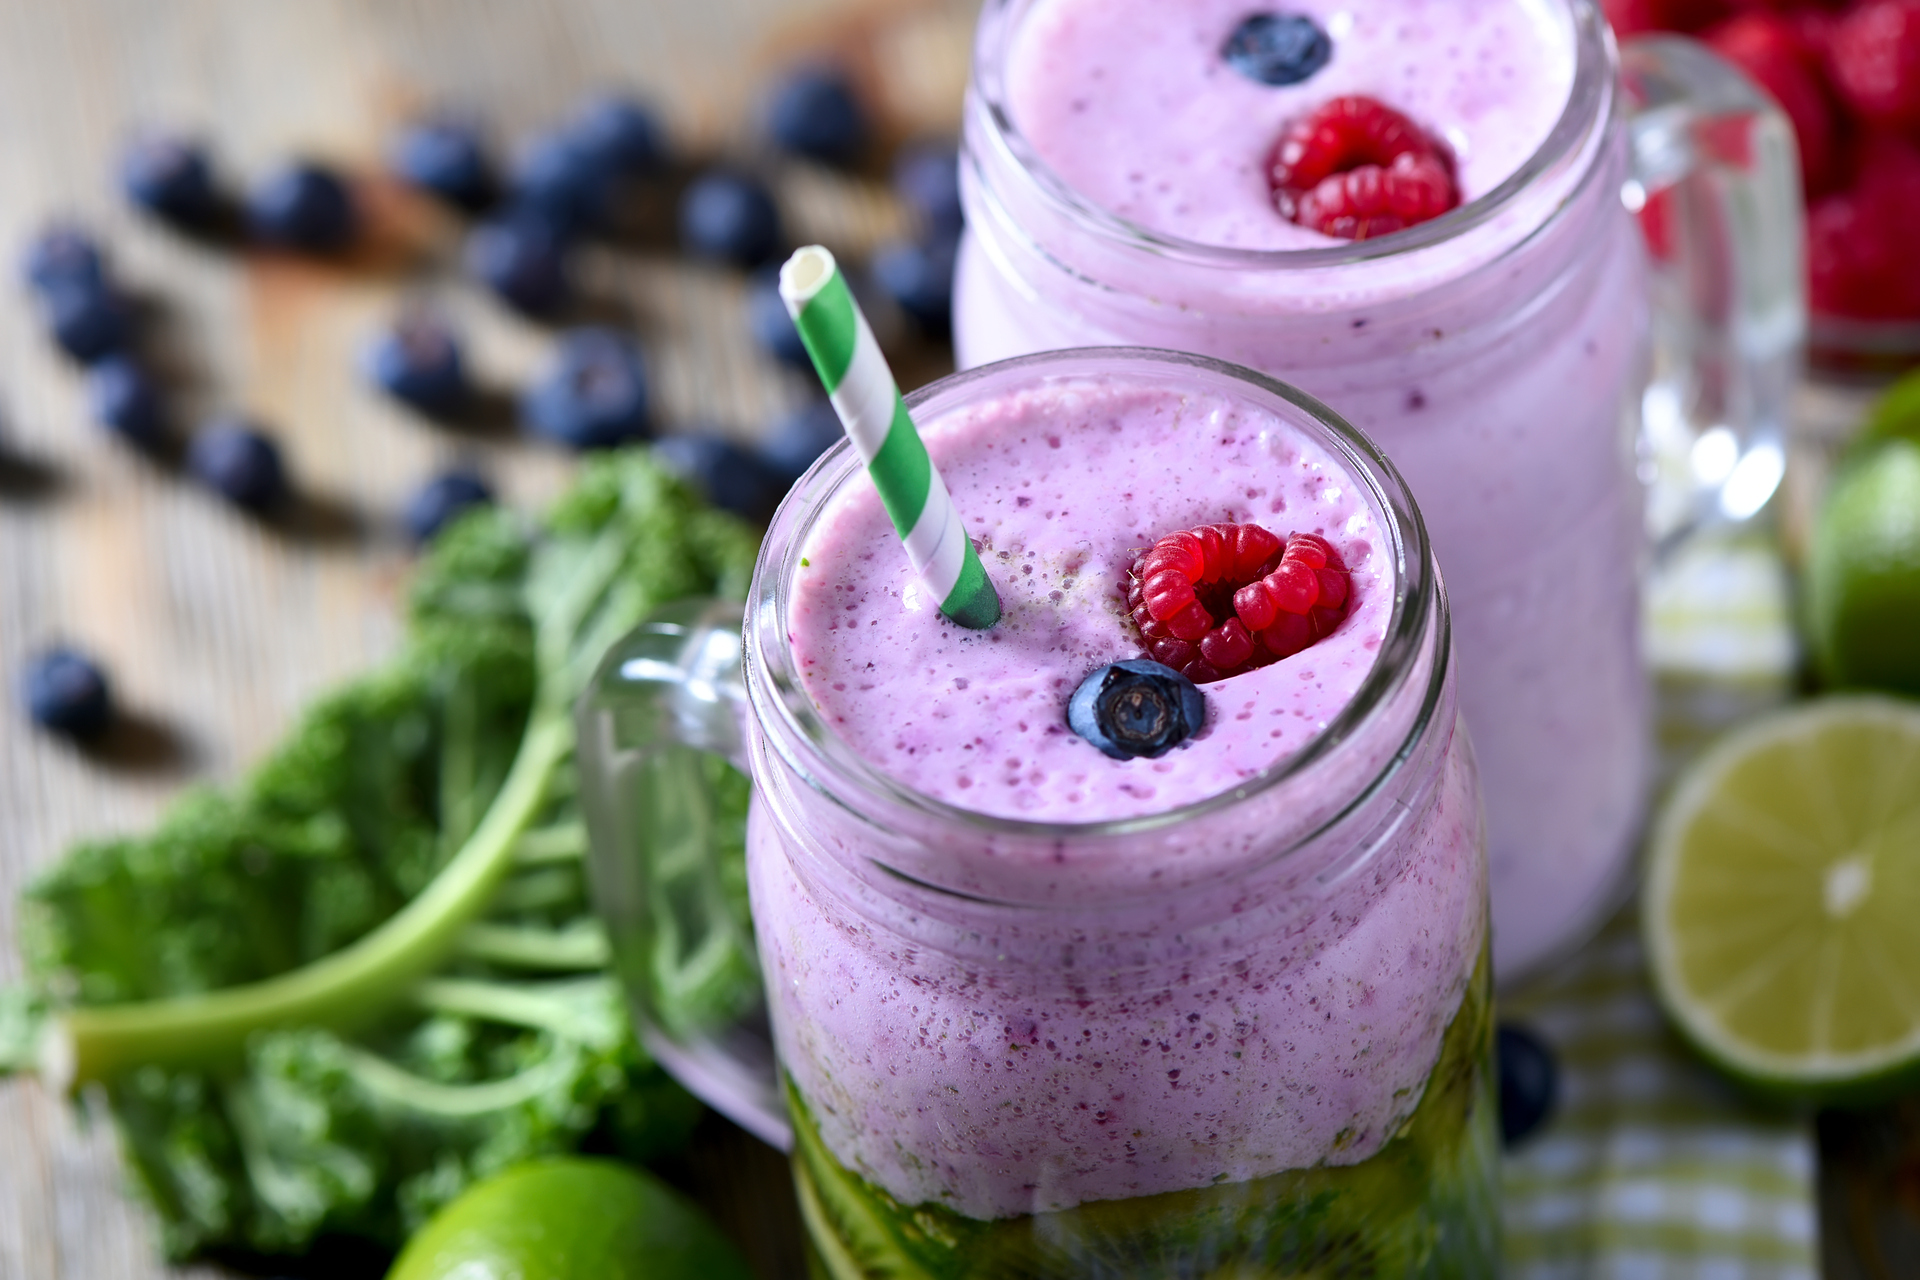 Kale Berry Smoothie For Losing Weight